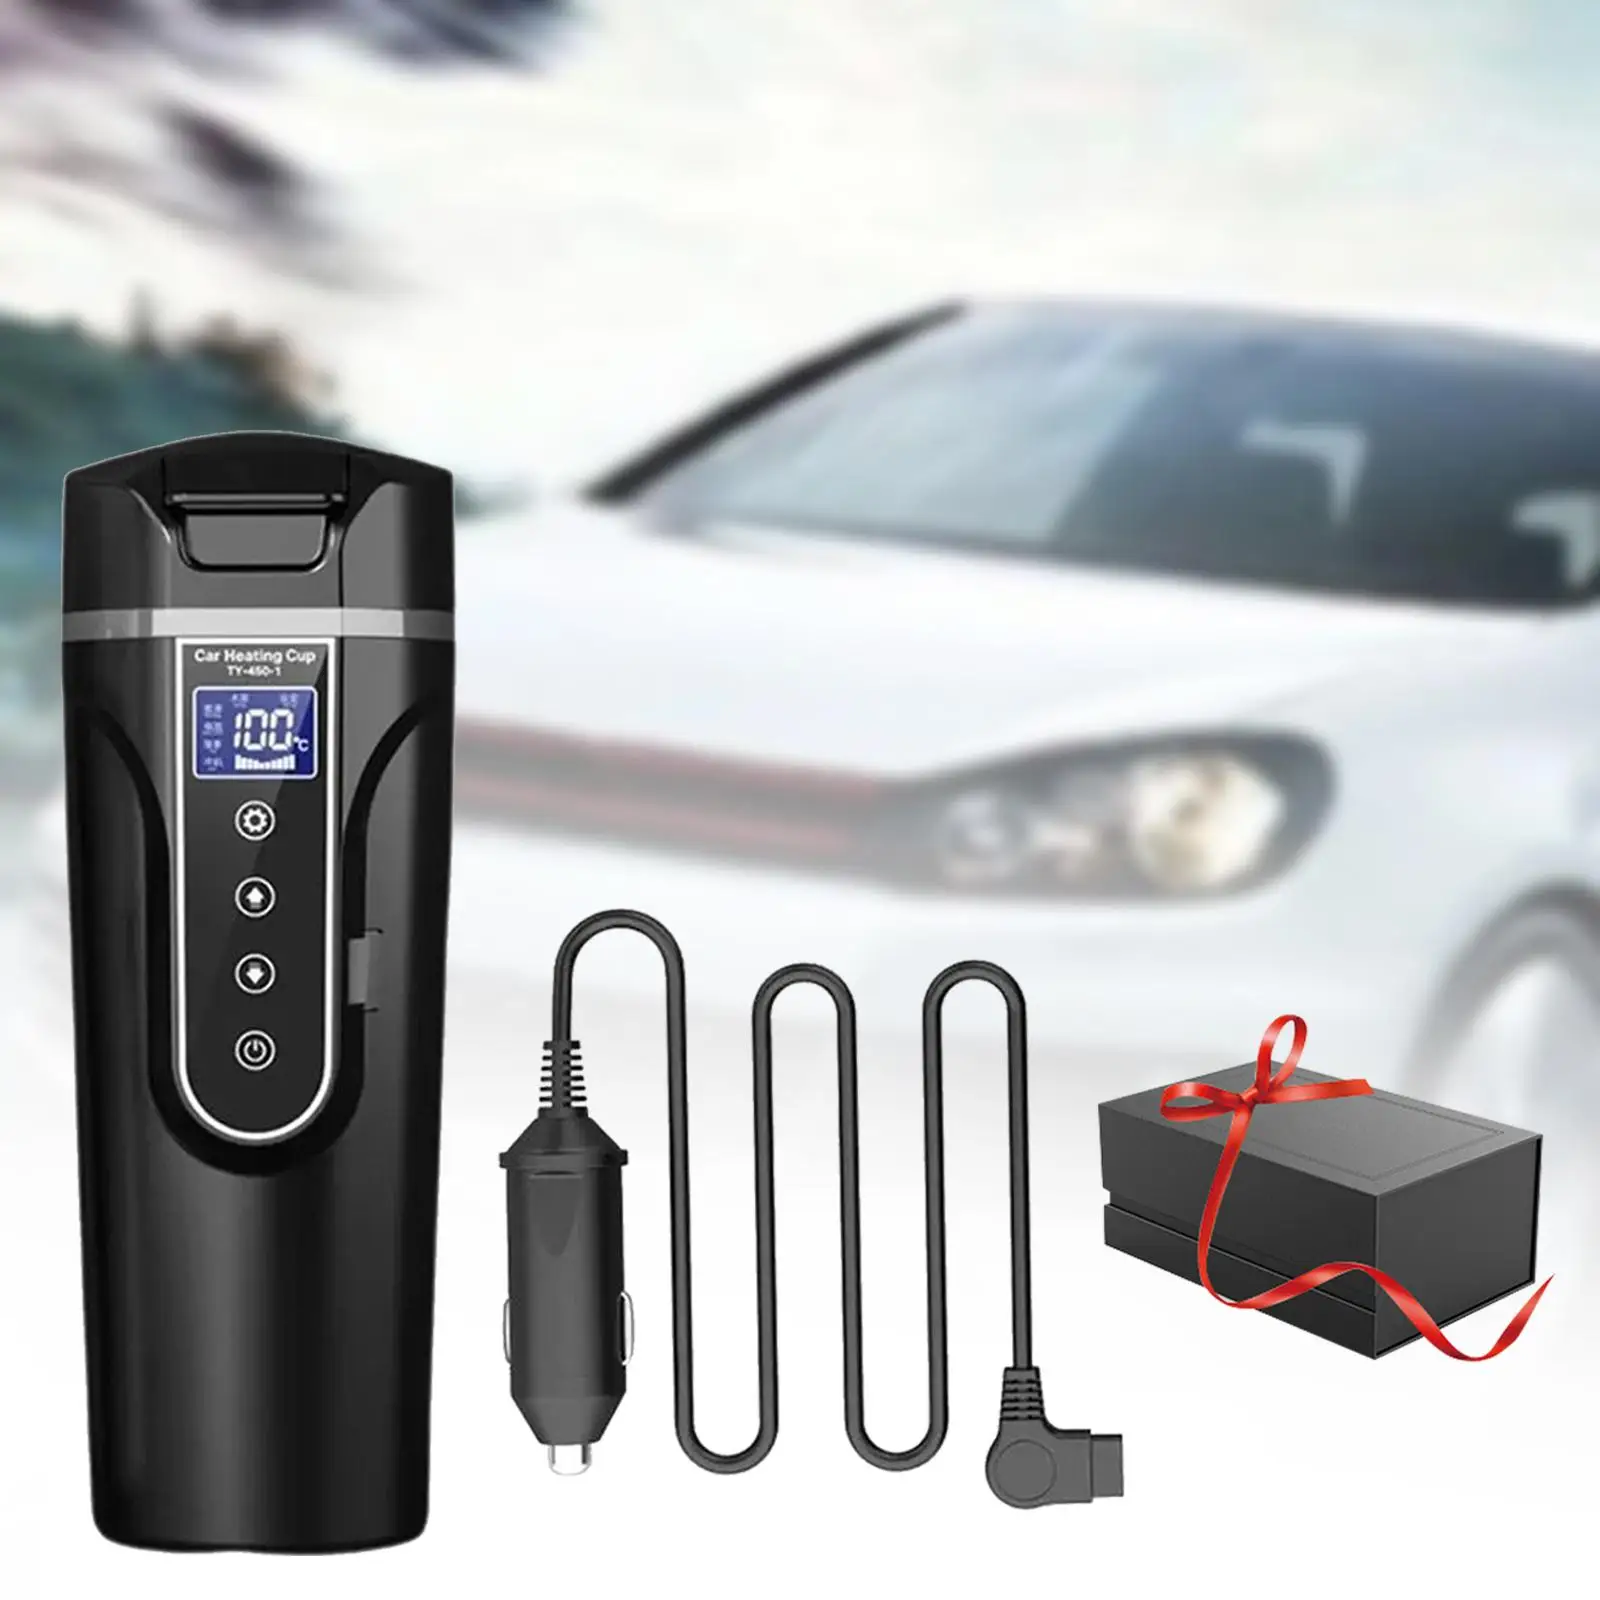 Electric Tea Kettle Car Heating Cup Stainless Steel Portable 24V/12V Car Traveling Kettle Travel Coffee Mug for Trip Airplane